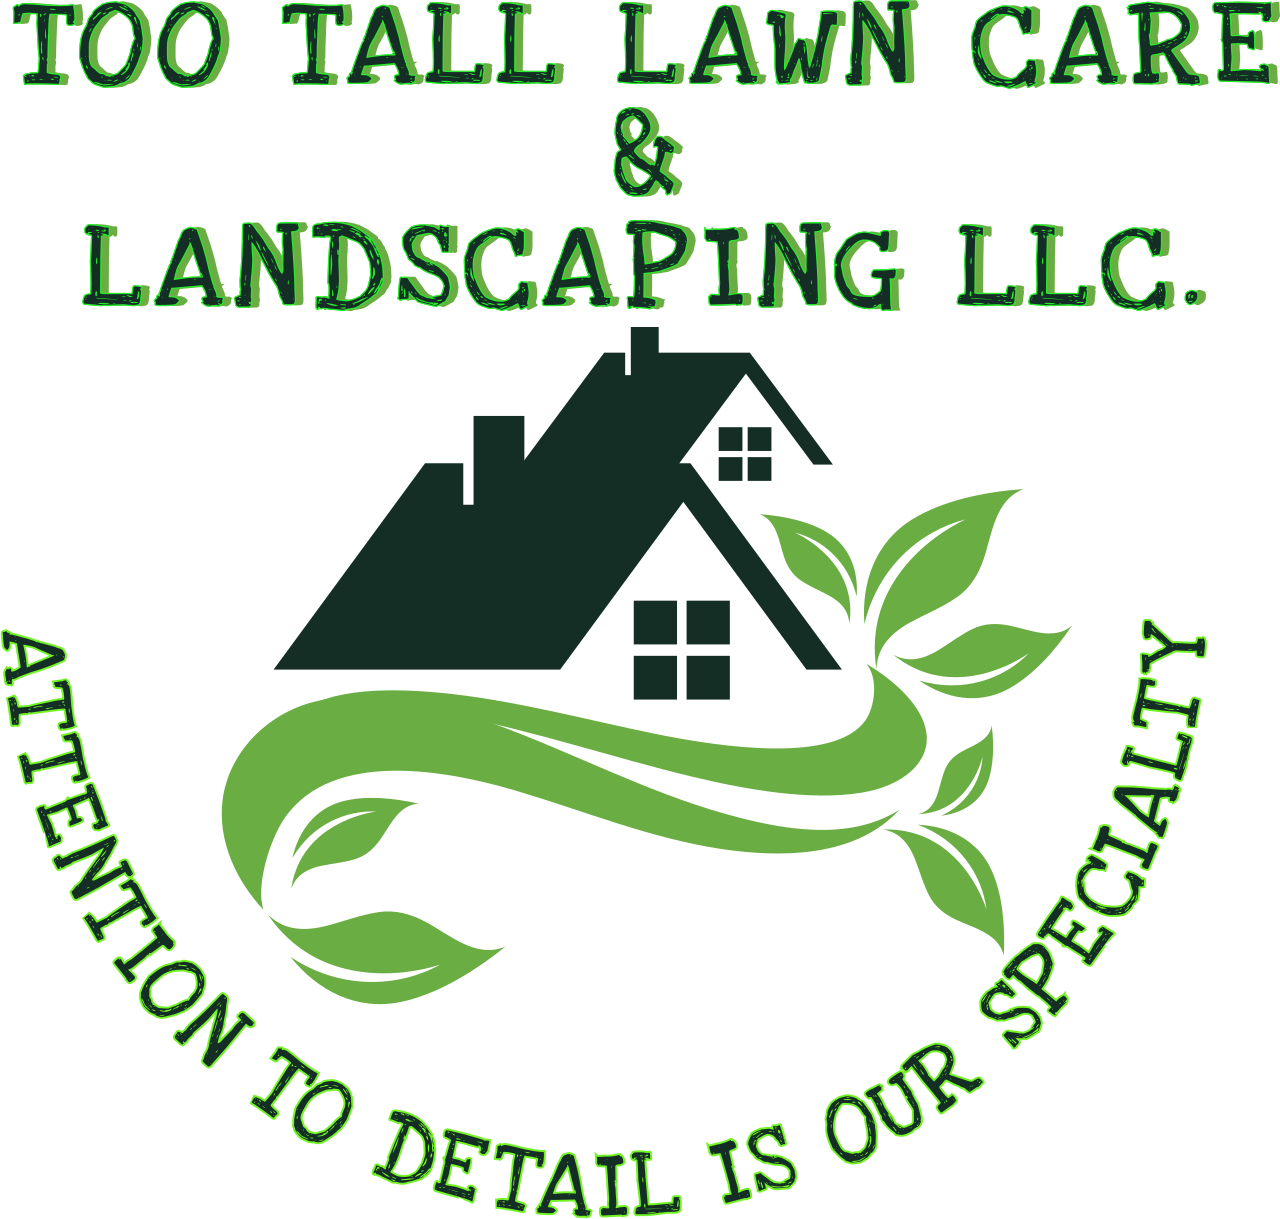 Too Tall Lawn Care
 & 
Landscaping LLC.'s logo